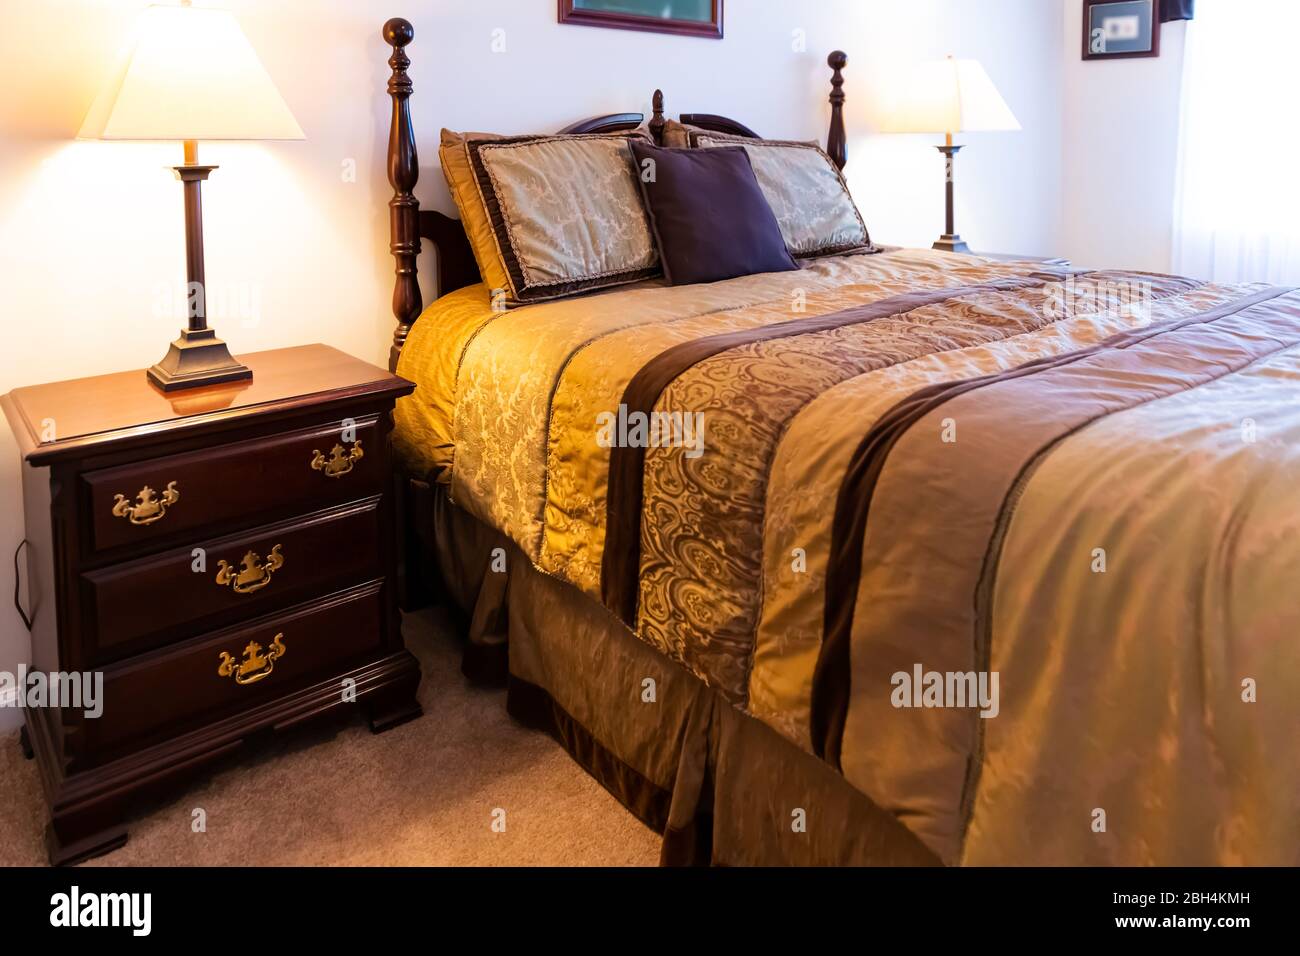 https://c8.alamy.com/comp/2BH4KMH/closeup-of-new-bed-comforter-with-decorative-pillows-and-wooden-headboard-in-bedroom-in-staging-home-house-or-apartment-country-style-2BH4KMH.jpg